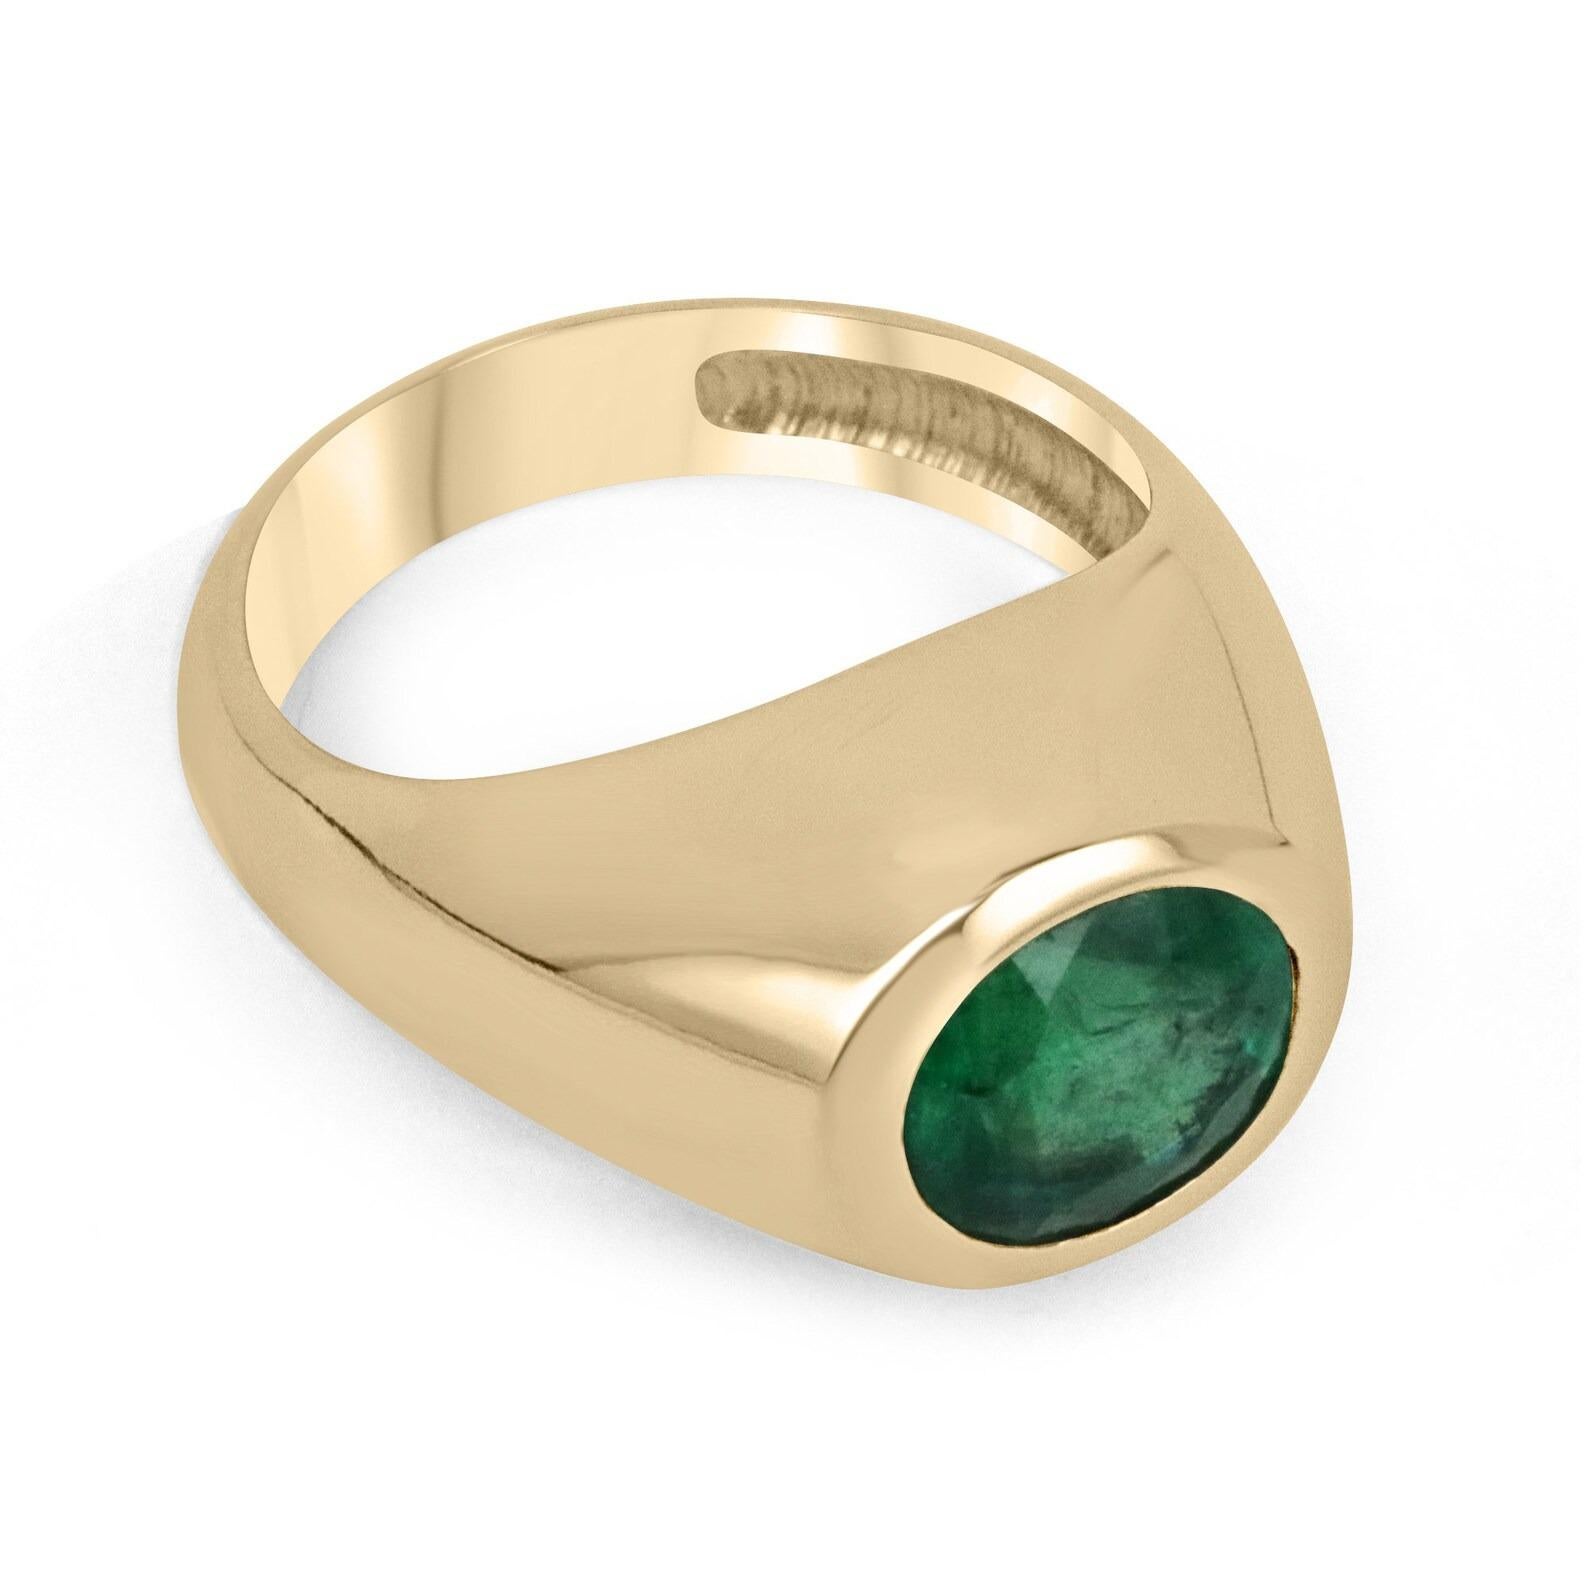 This is an elegant masculine oval emerald men's pinky ring that is sure to impress. A rare earth-mined natural emerald gemstone is securely bezel set. The ring is dexterously crafted in pure 18K solid yellow gold. A masterpiece meant to style for